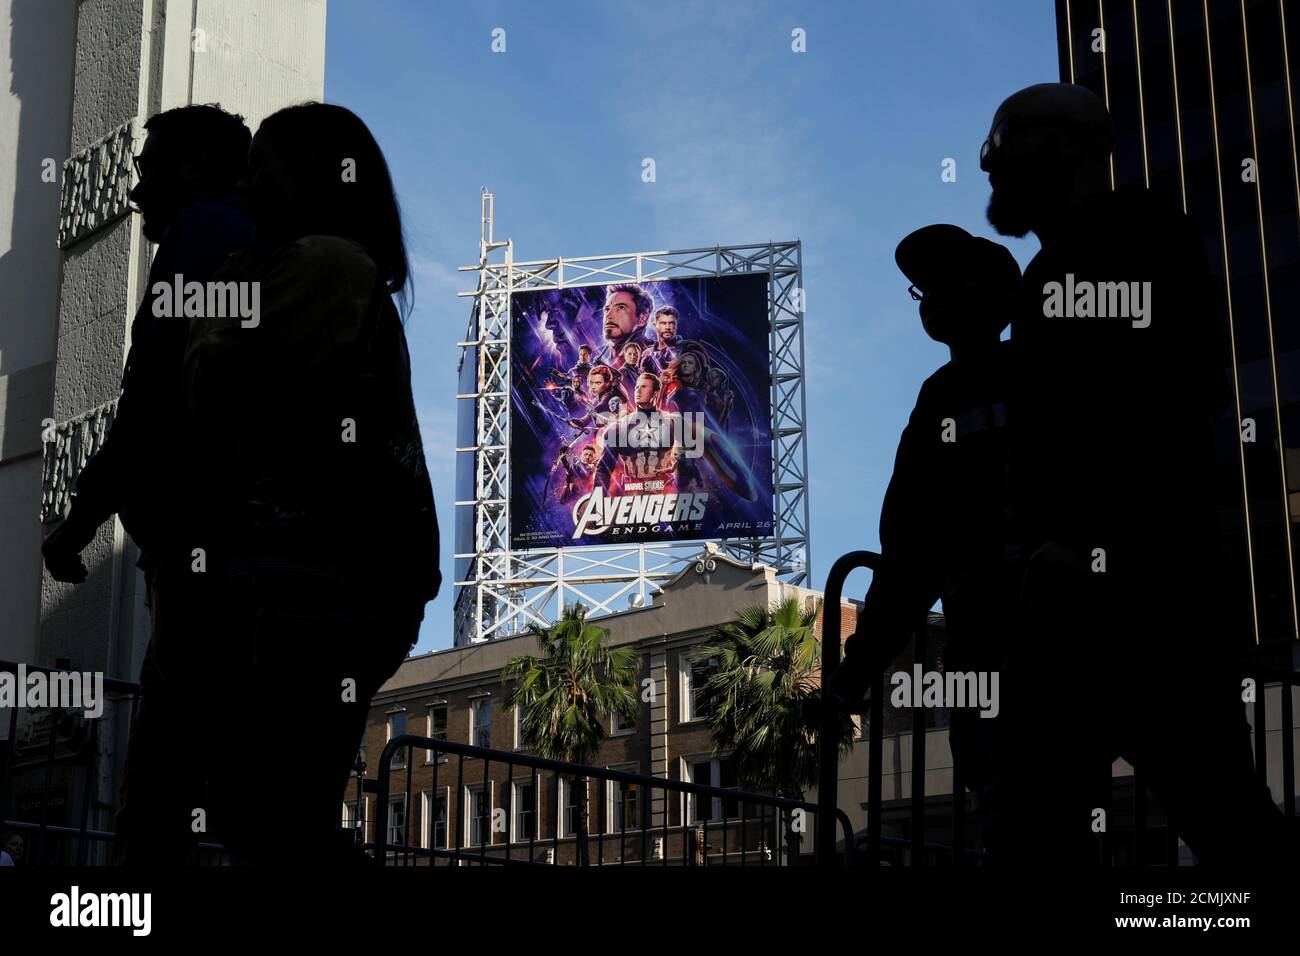 Avengers fans arrive at the TCL Chinese Theatre in Hollywood to attend the opening screening of 'Avengers: Endgame' in Los Angeles, California, U.S., April 25, 2019.  REUTERS/Mike Blake Stock Photo